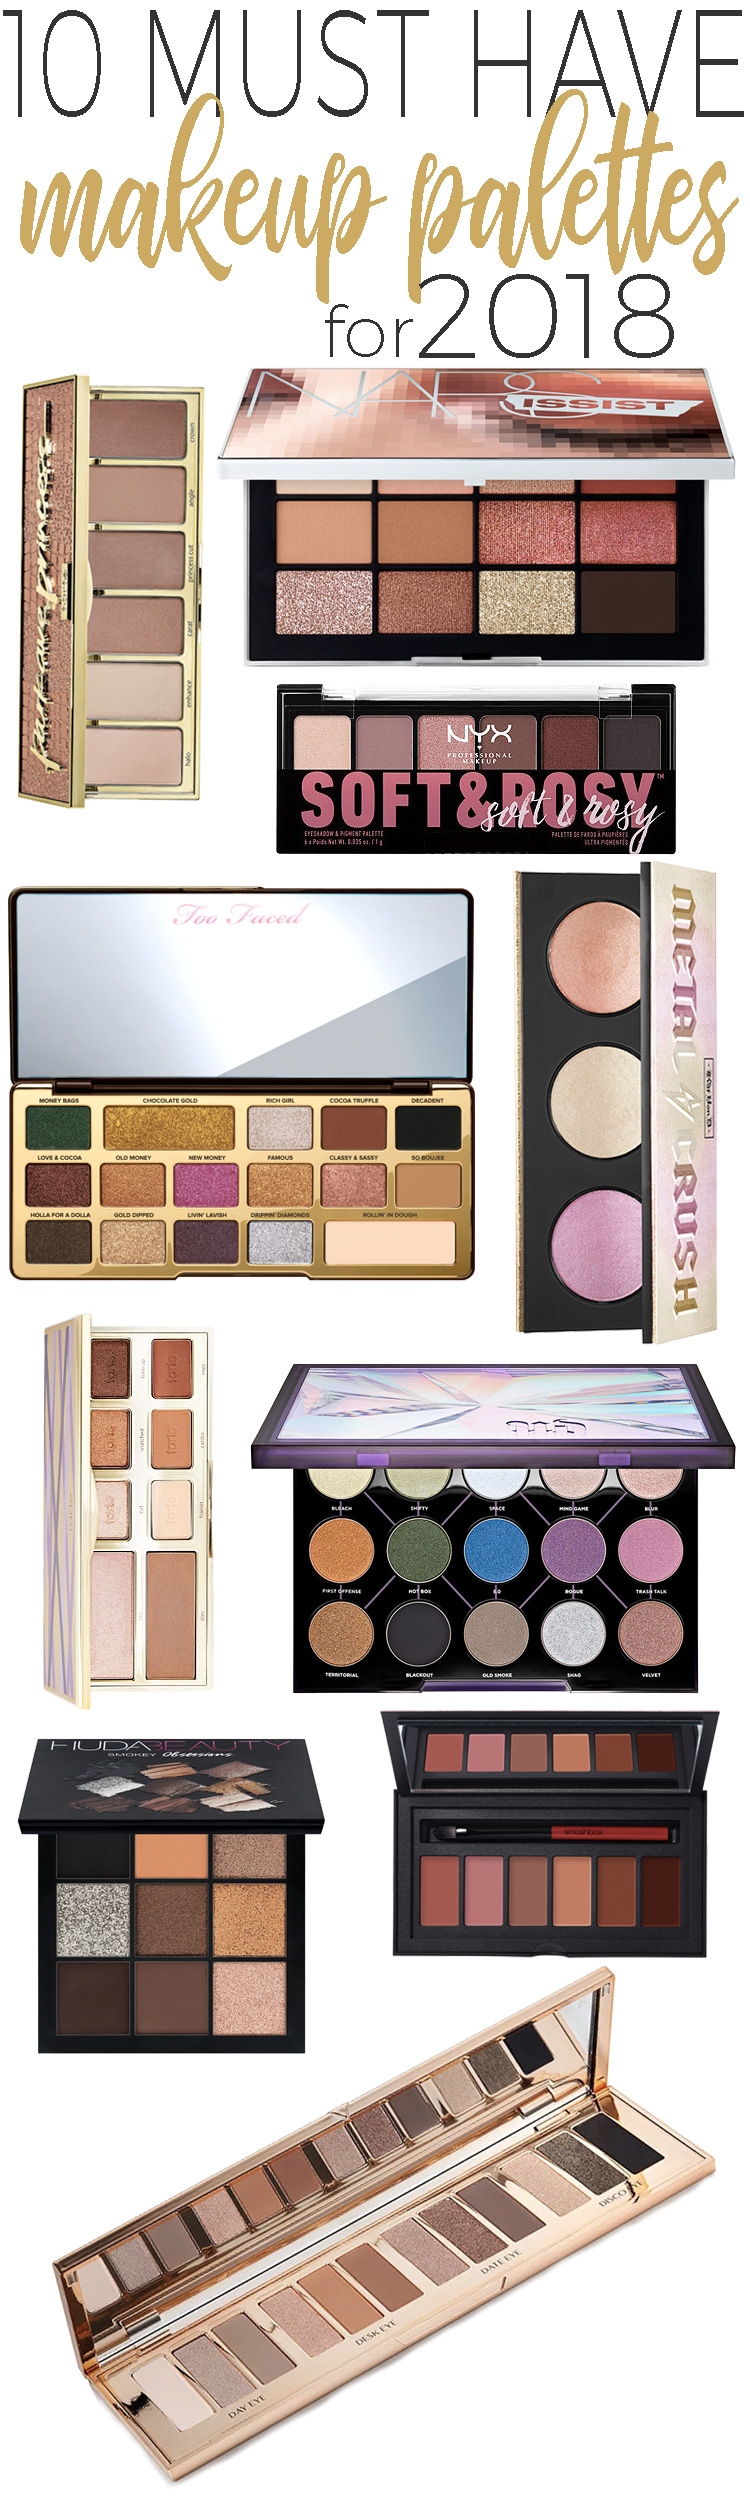 10 Must Have Makeup Palettes for 2018! Beautiful Makeup